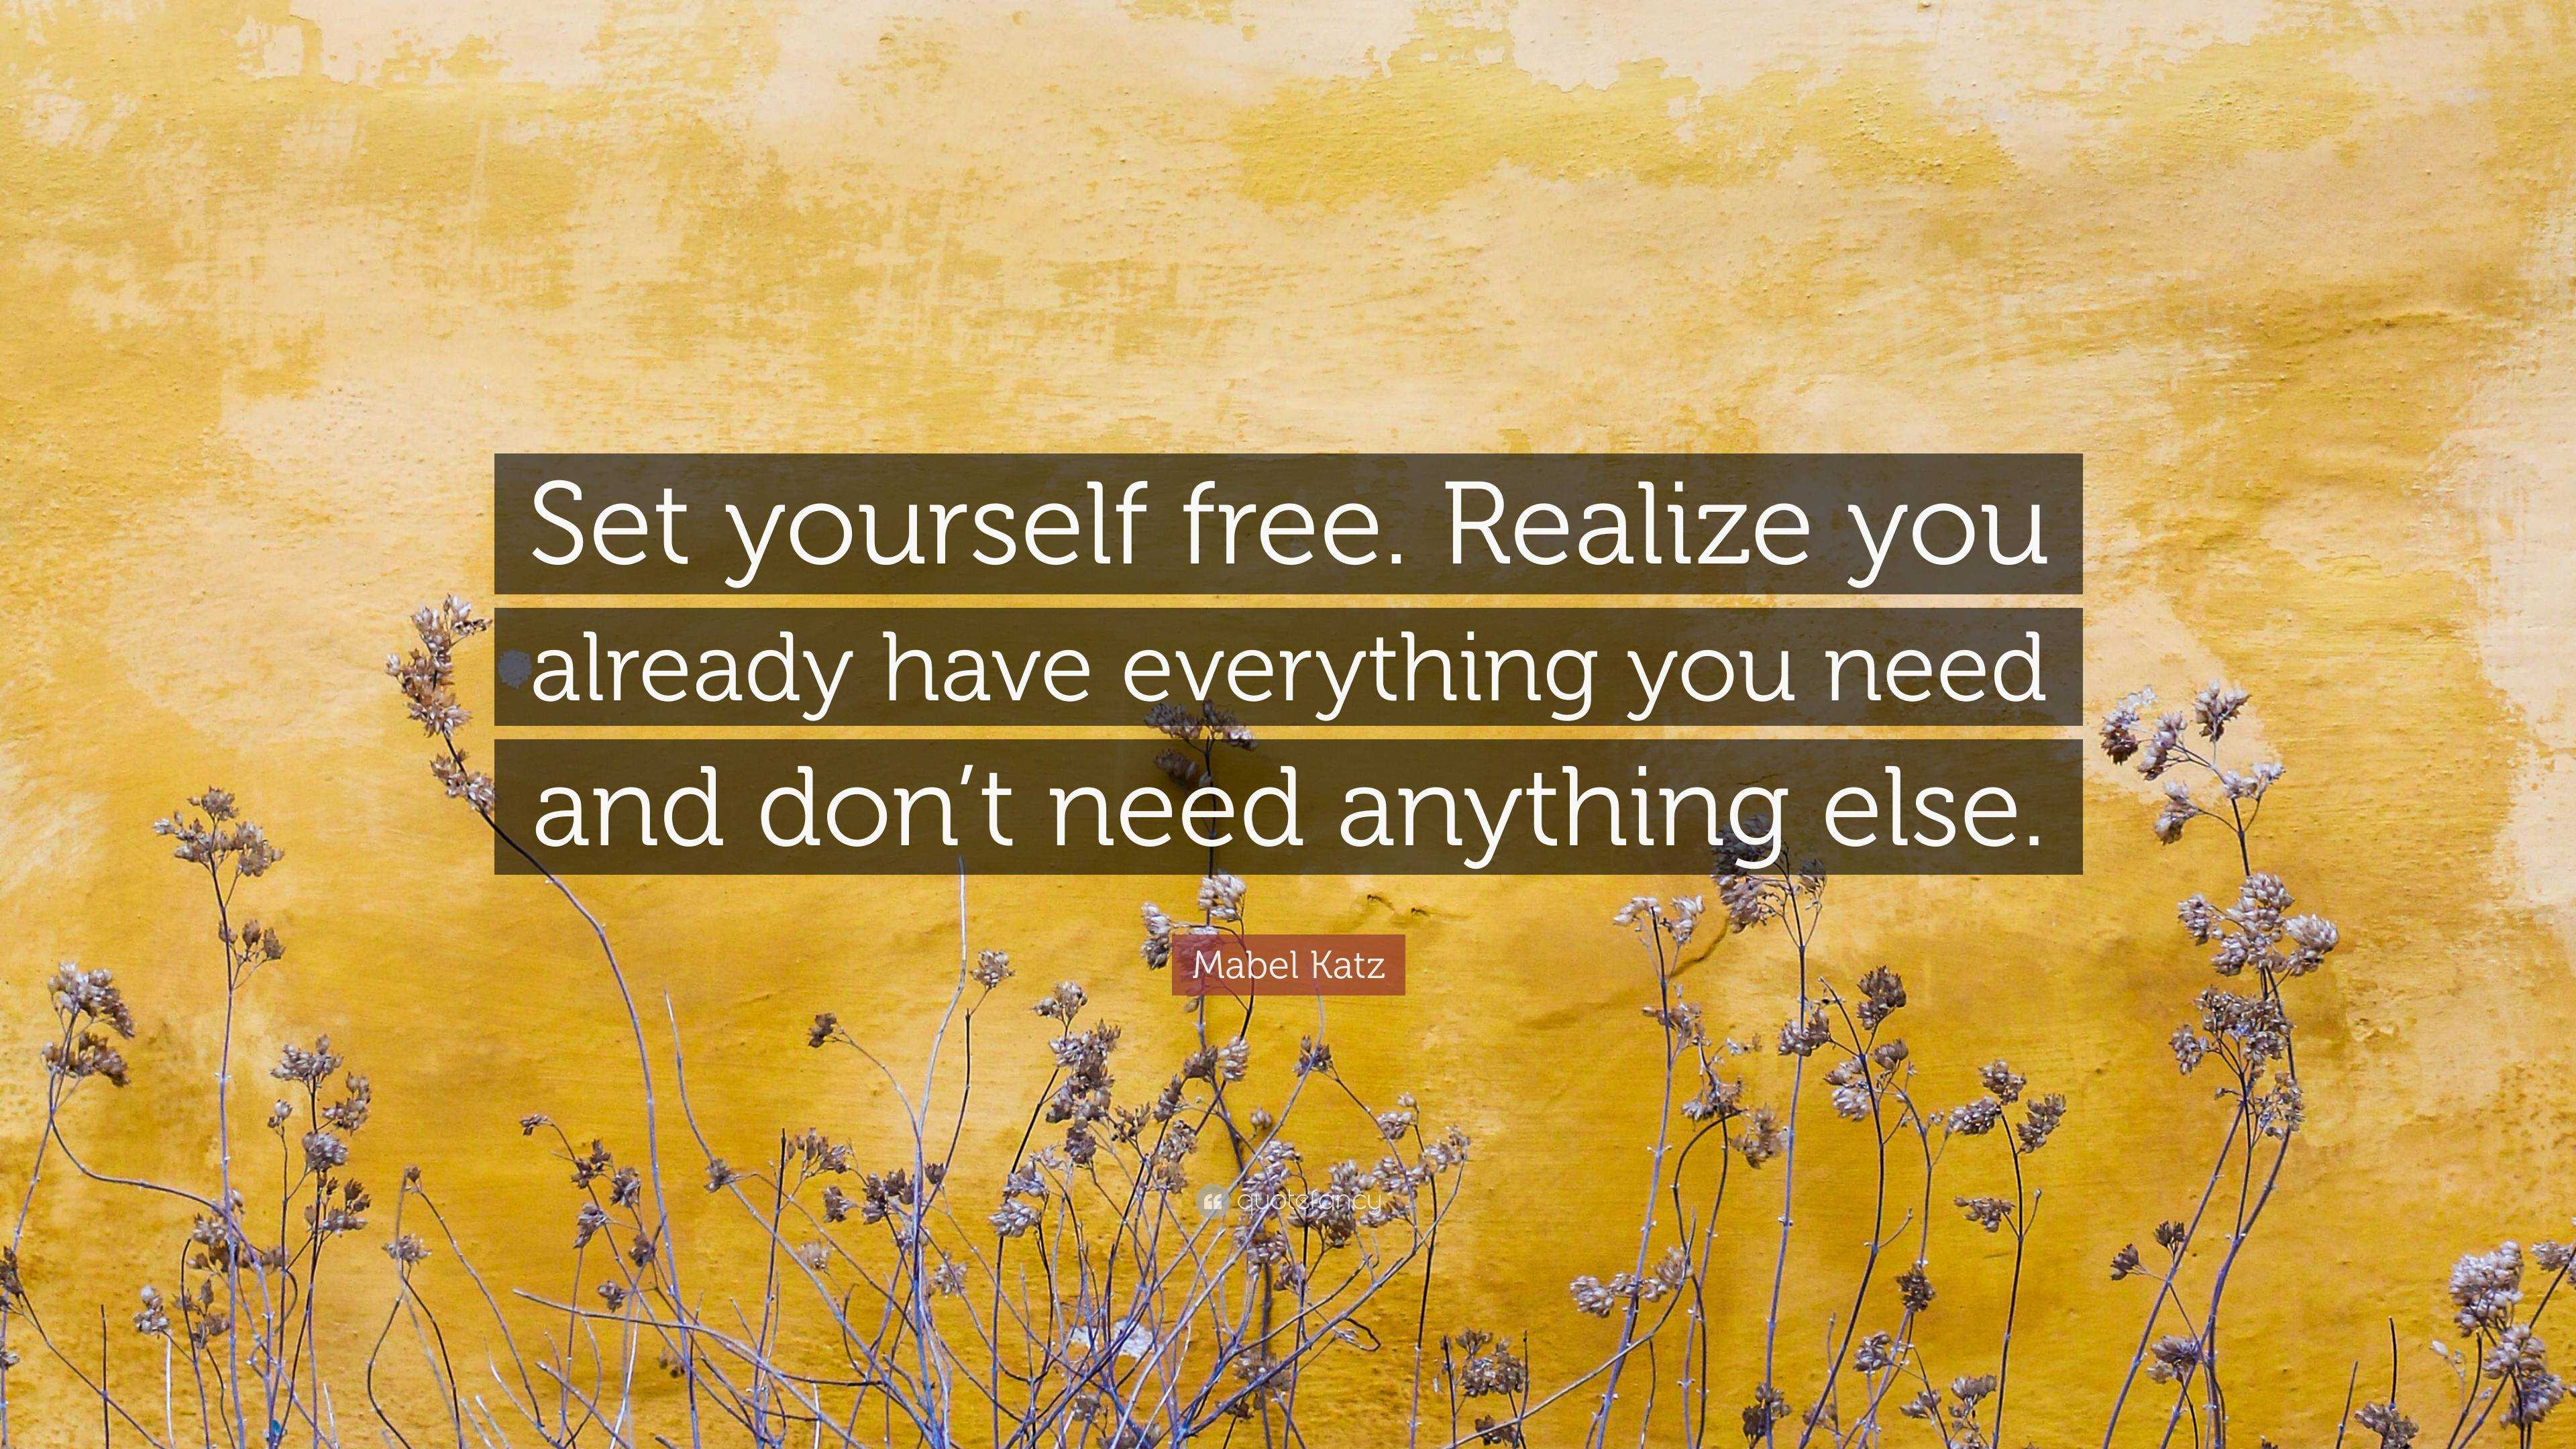 How to Set Yourself Free